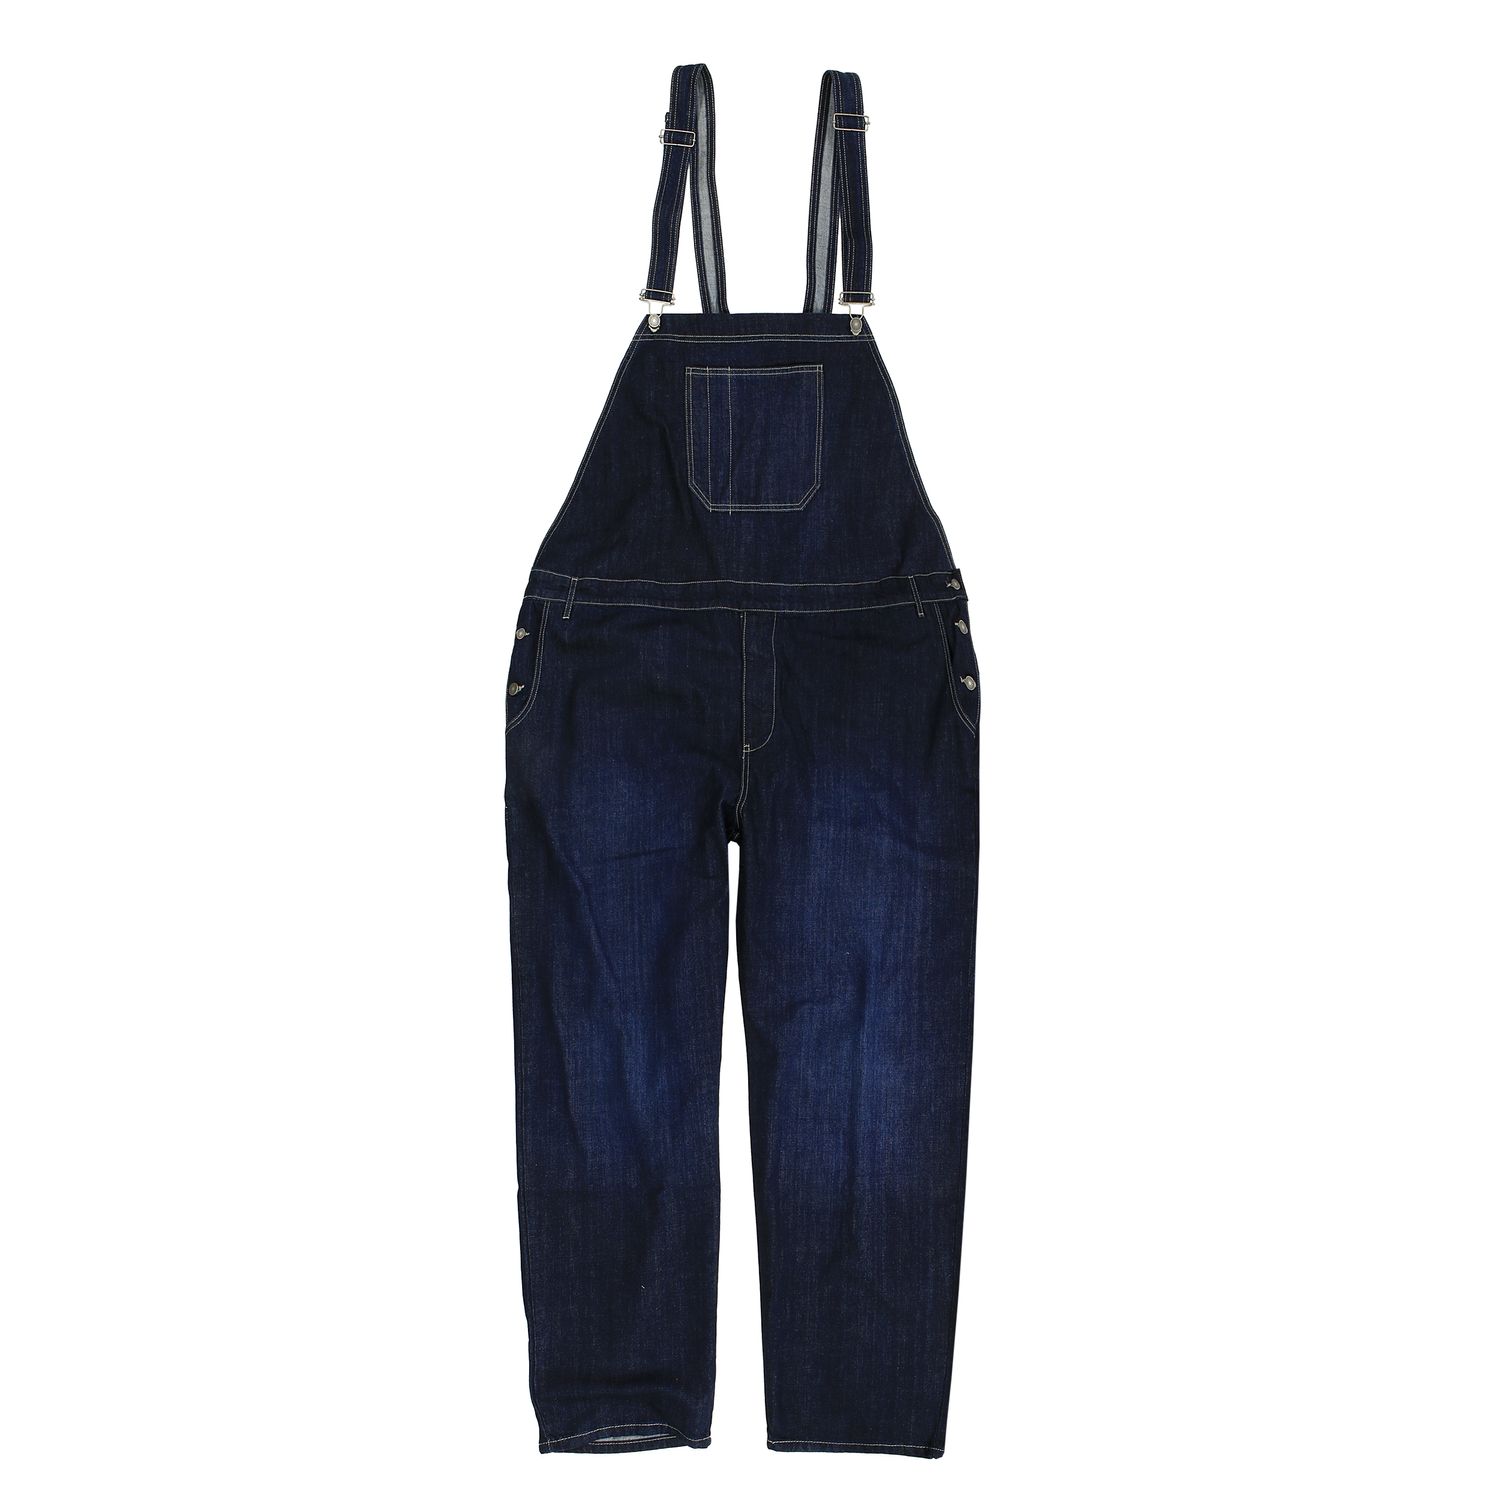 Jeans dungarees in dark blue- stonewash by Abraxas in large sizes up to 12XL